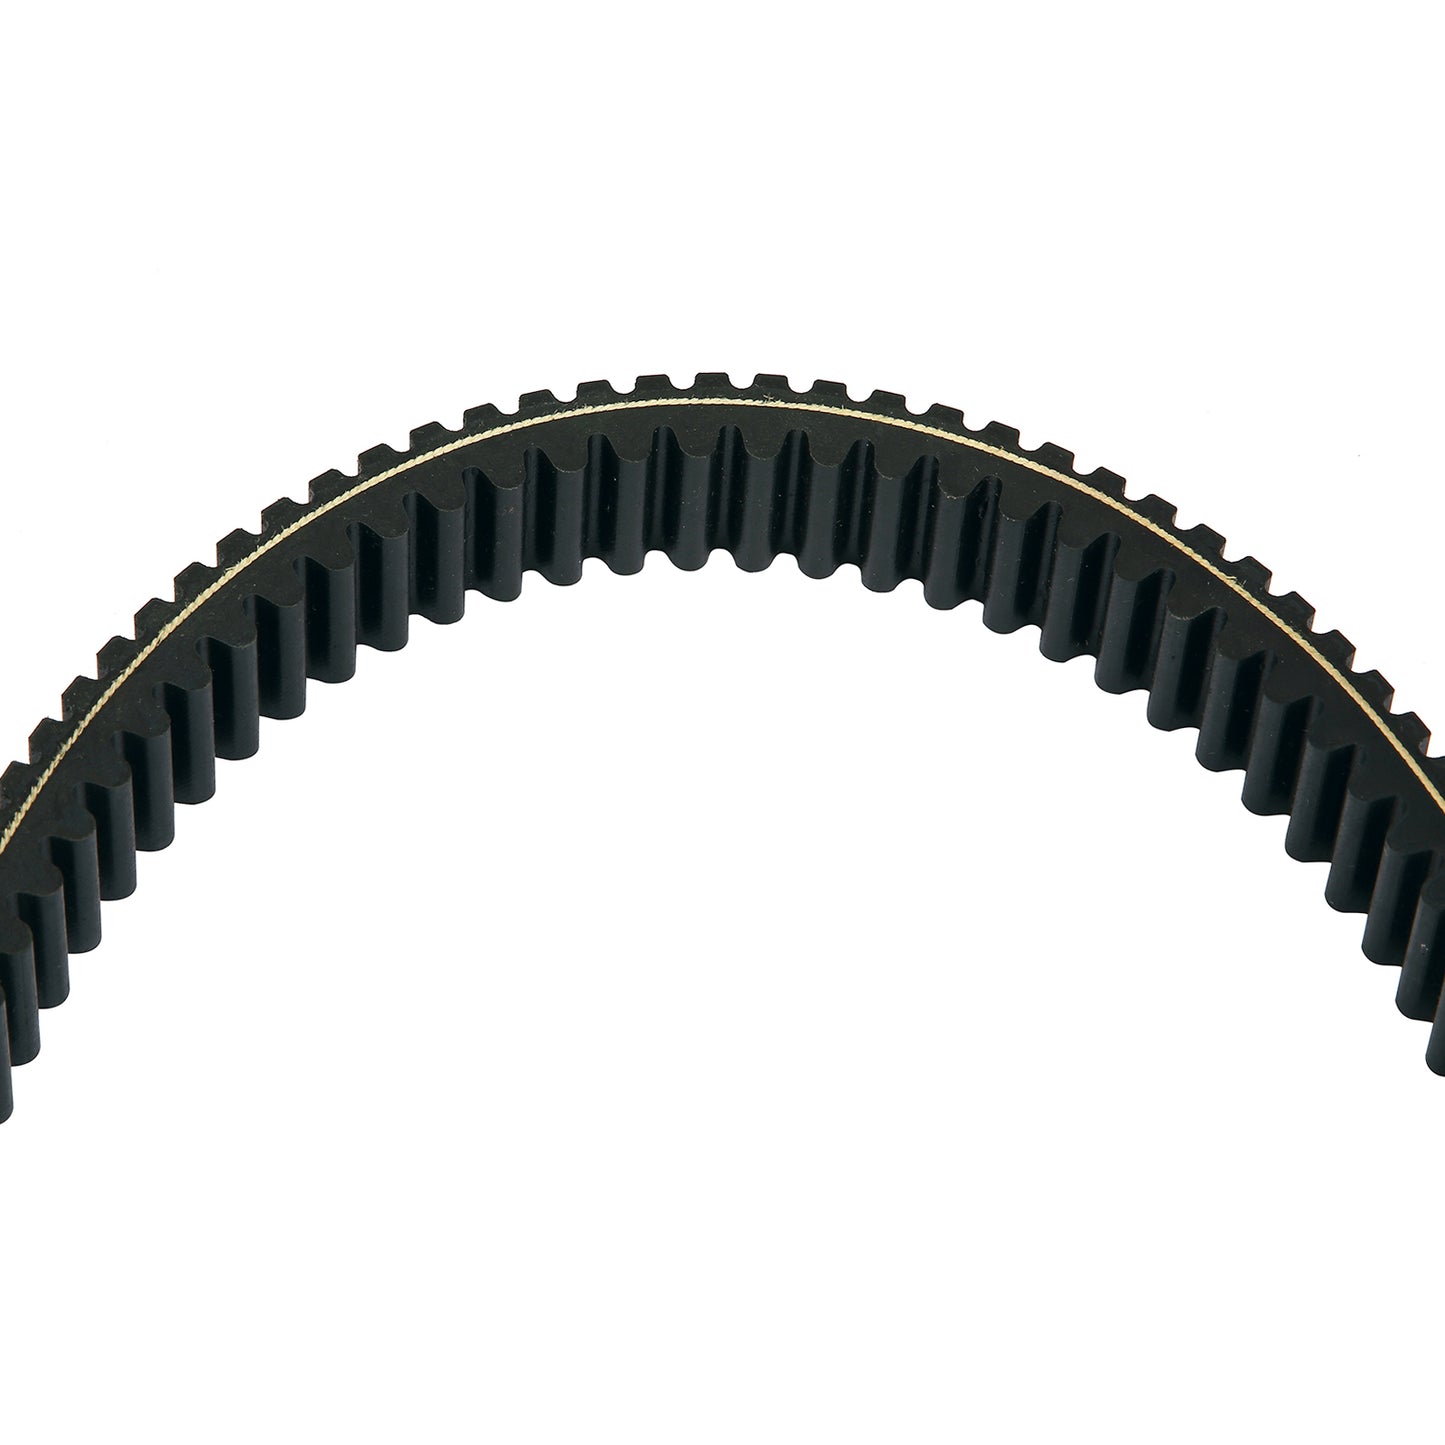 CAM-94VS3020 Can Am Belt Drive Belts for 2012-2013 Yamaha YFM300 Grizzly Automatic Caiman Rugged Terrain Belt